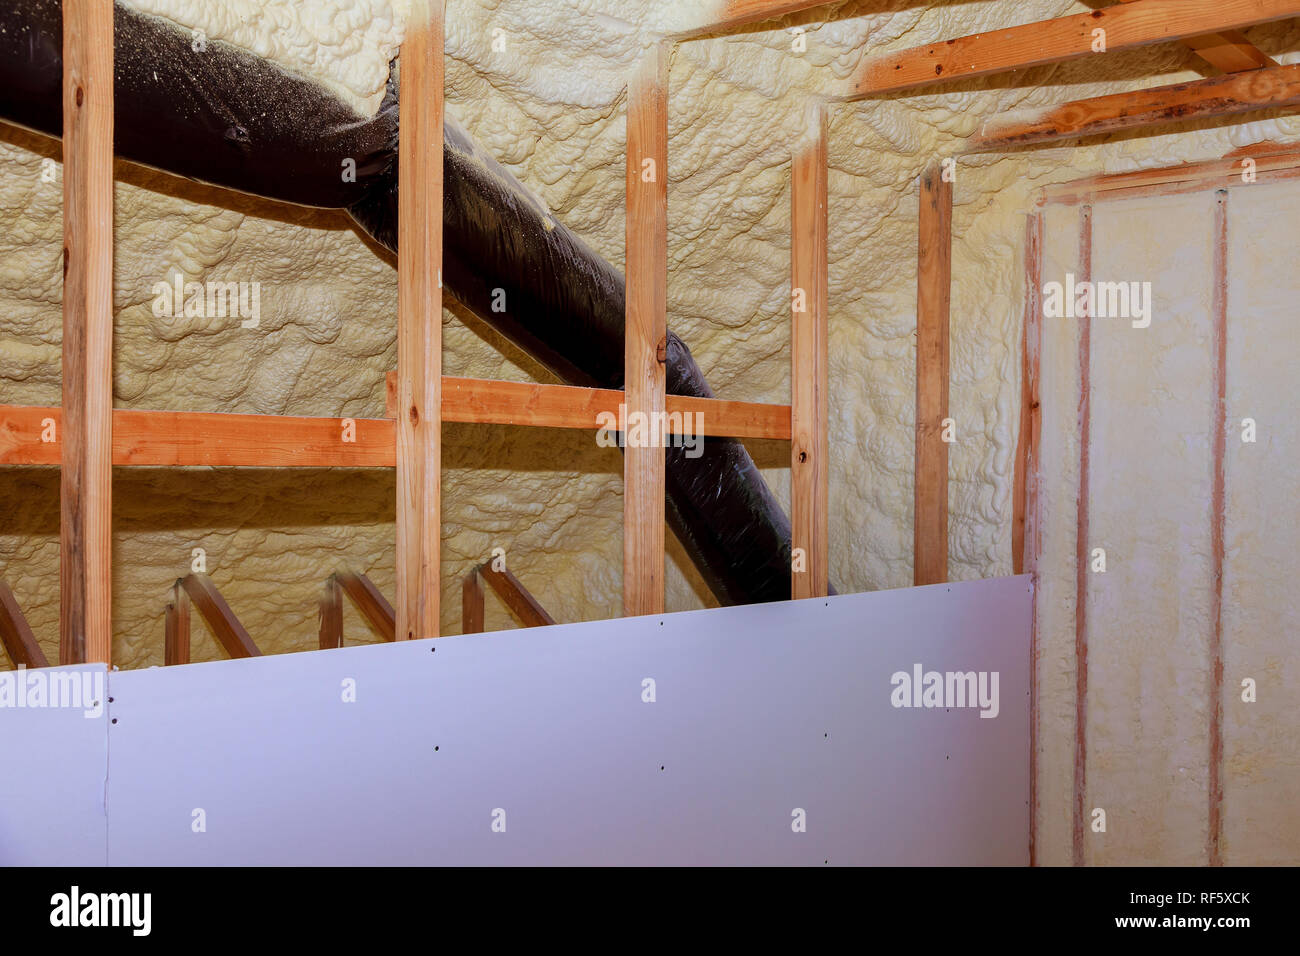 Inside wall insulation in wooden house, building under construction Stock Photo